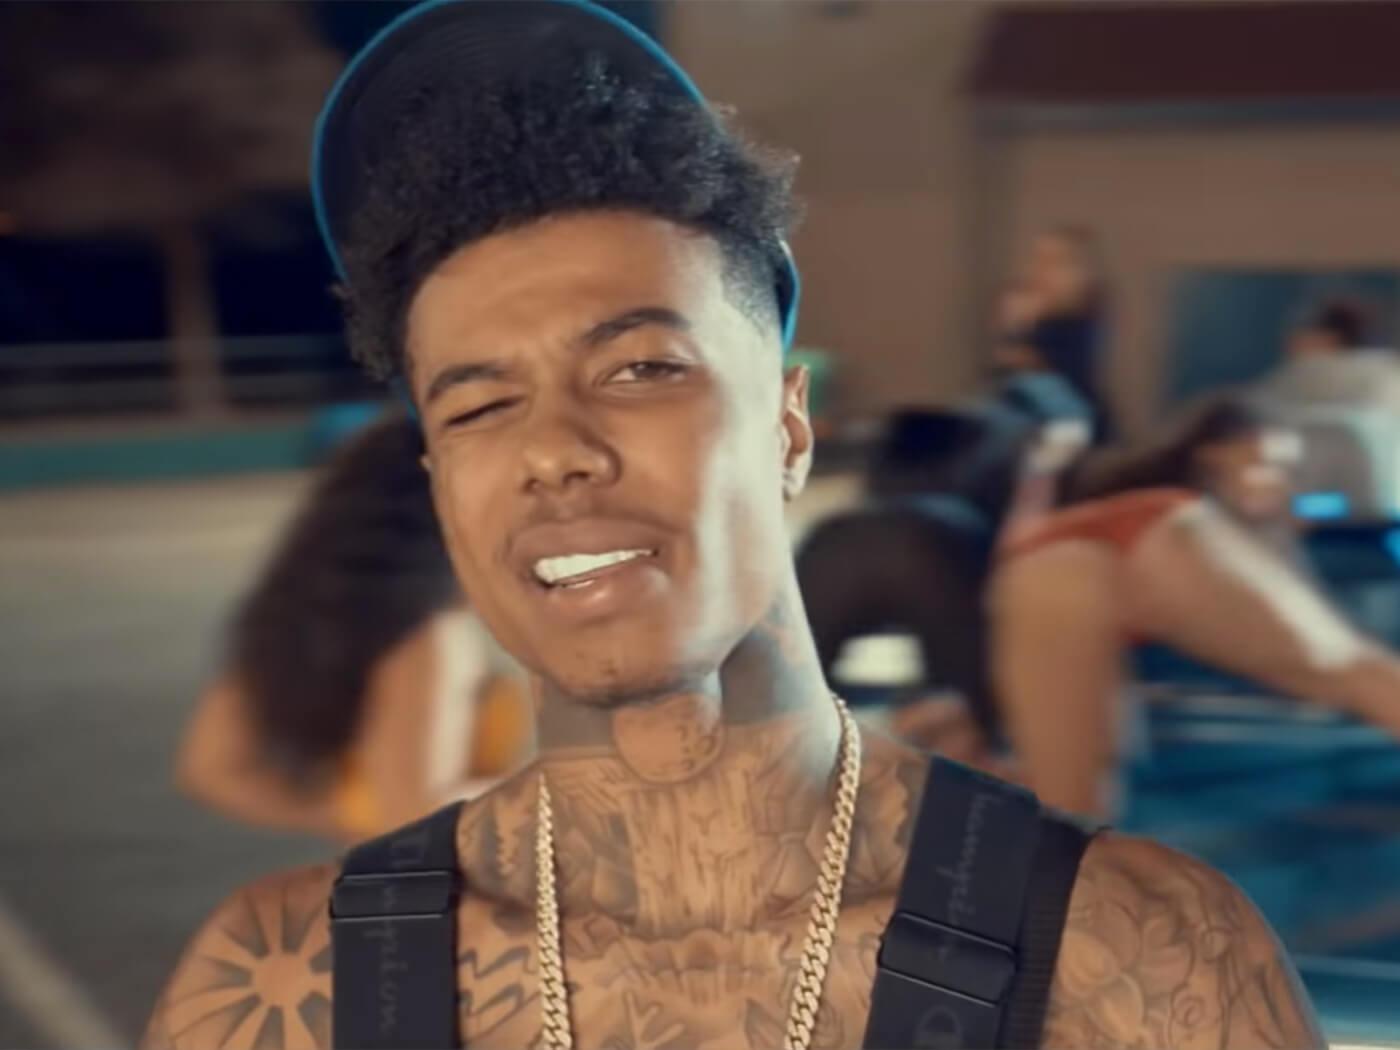 Blueface relives his days on the field in "Thotiana" remix MV.